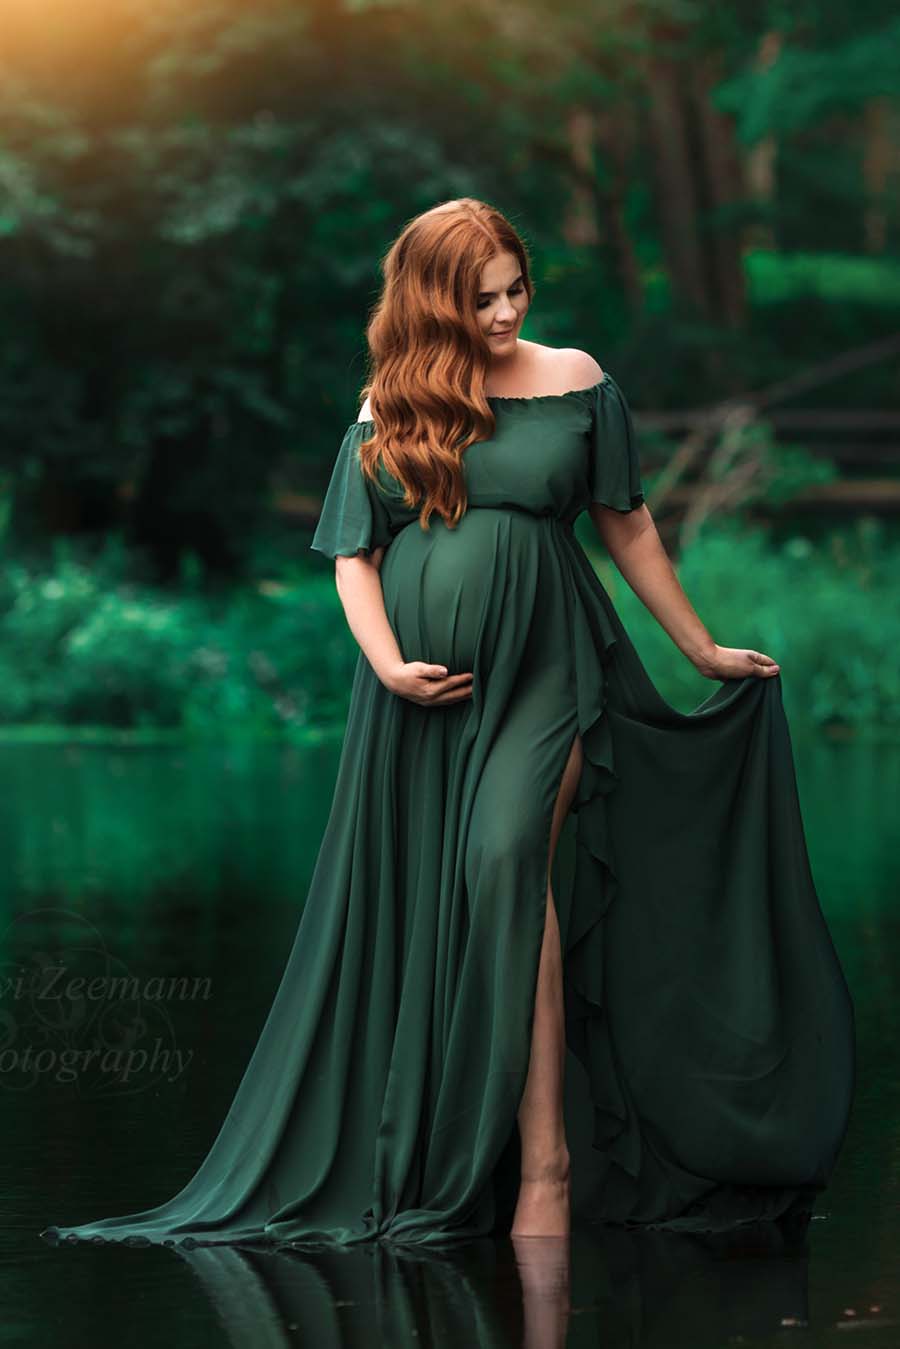 red haired pregnant model poses by the water wearing a chiffon dark green dress with a long circle skirt - the skirt has a delicate split on the side with ruffles at the ending. the top is off shoulder and has short ruffle sleeves. 